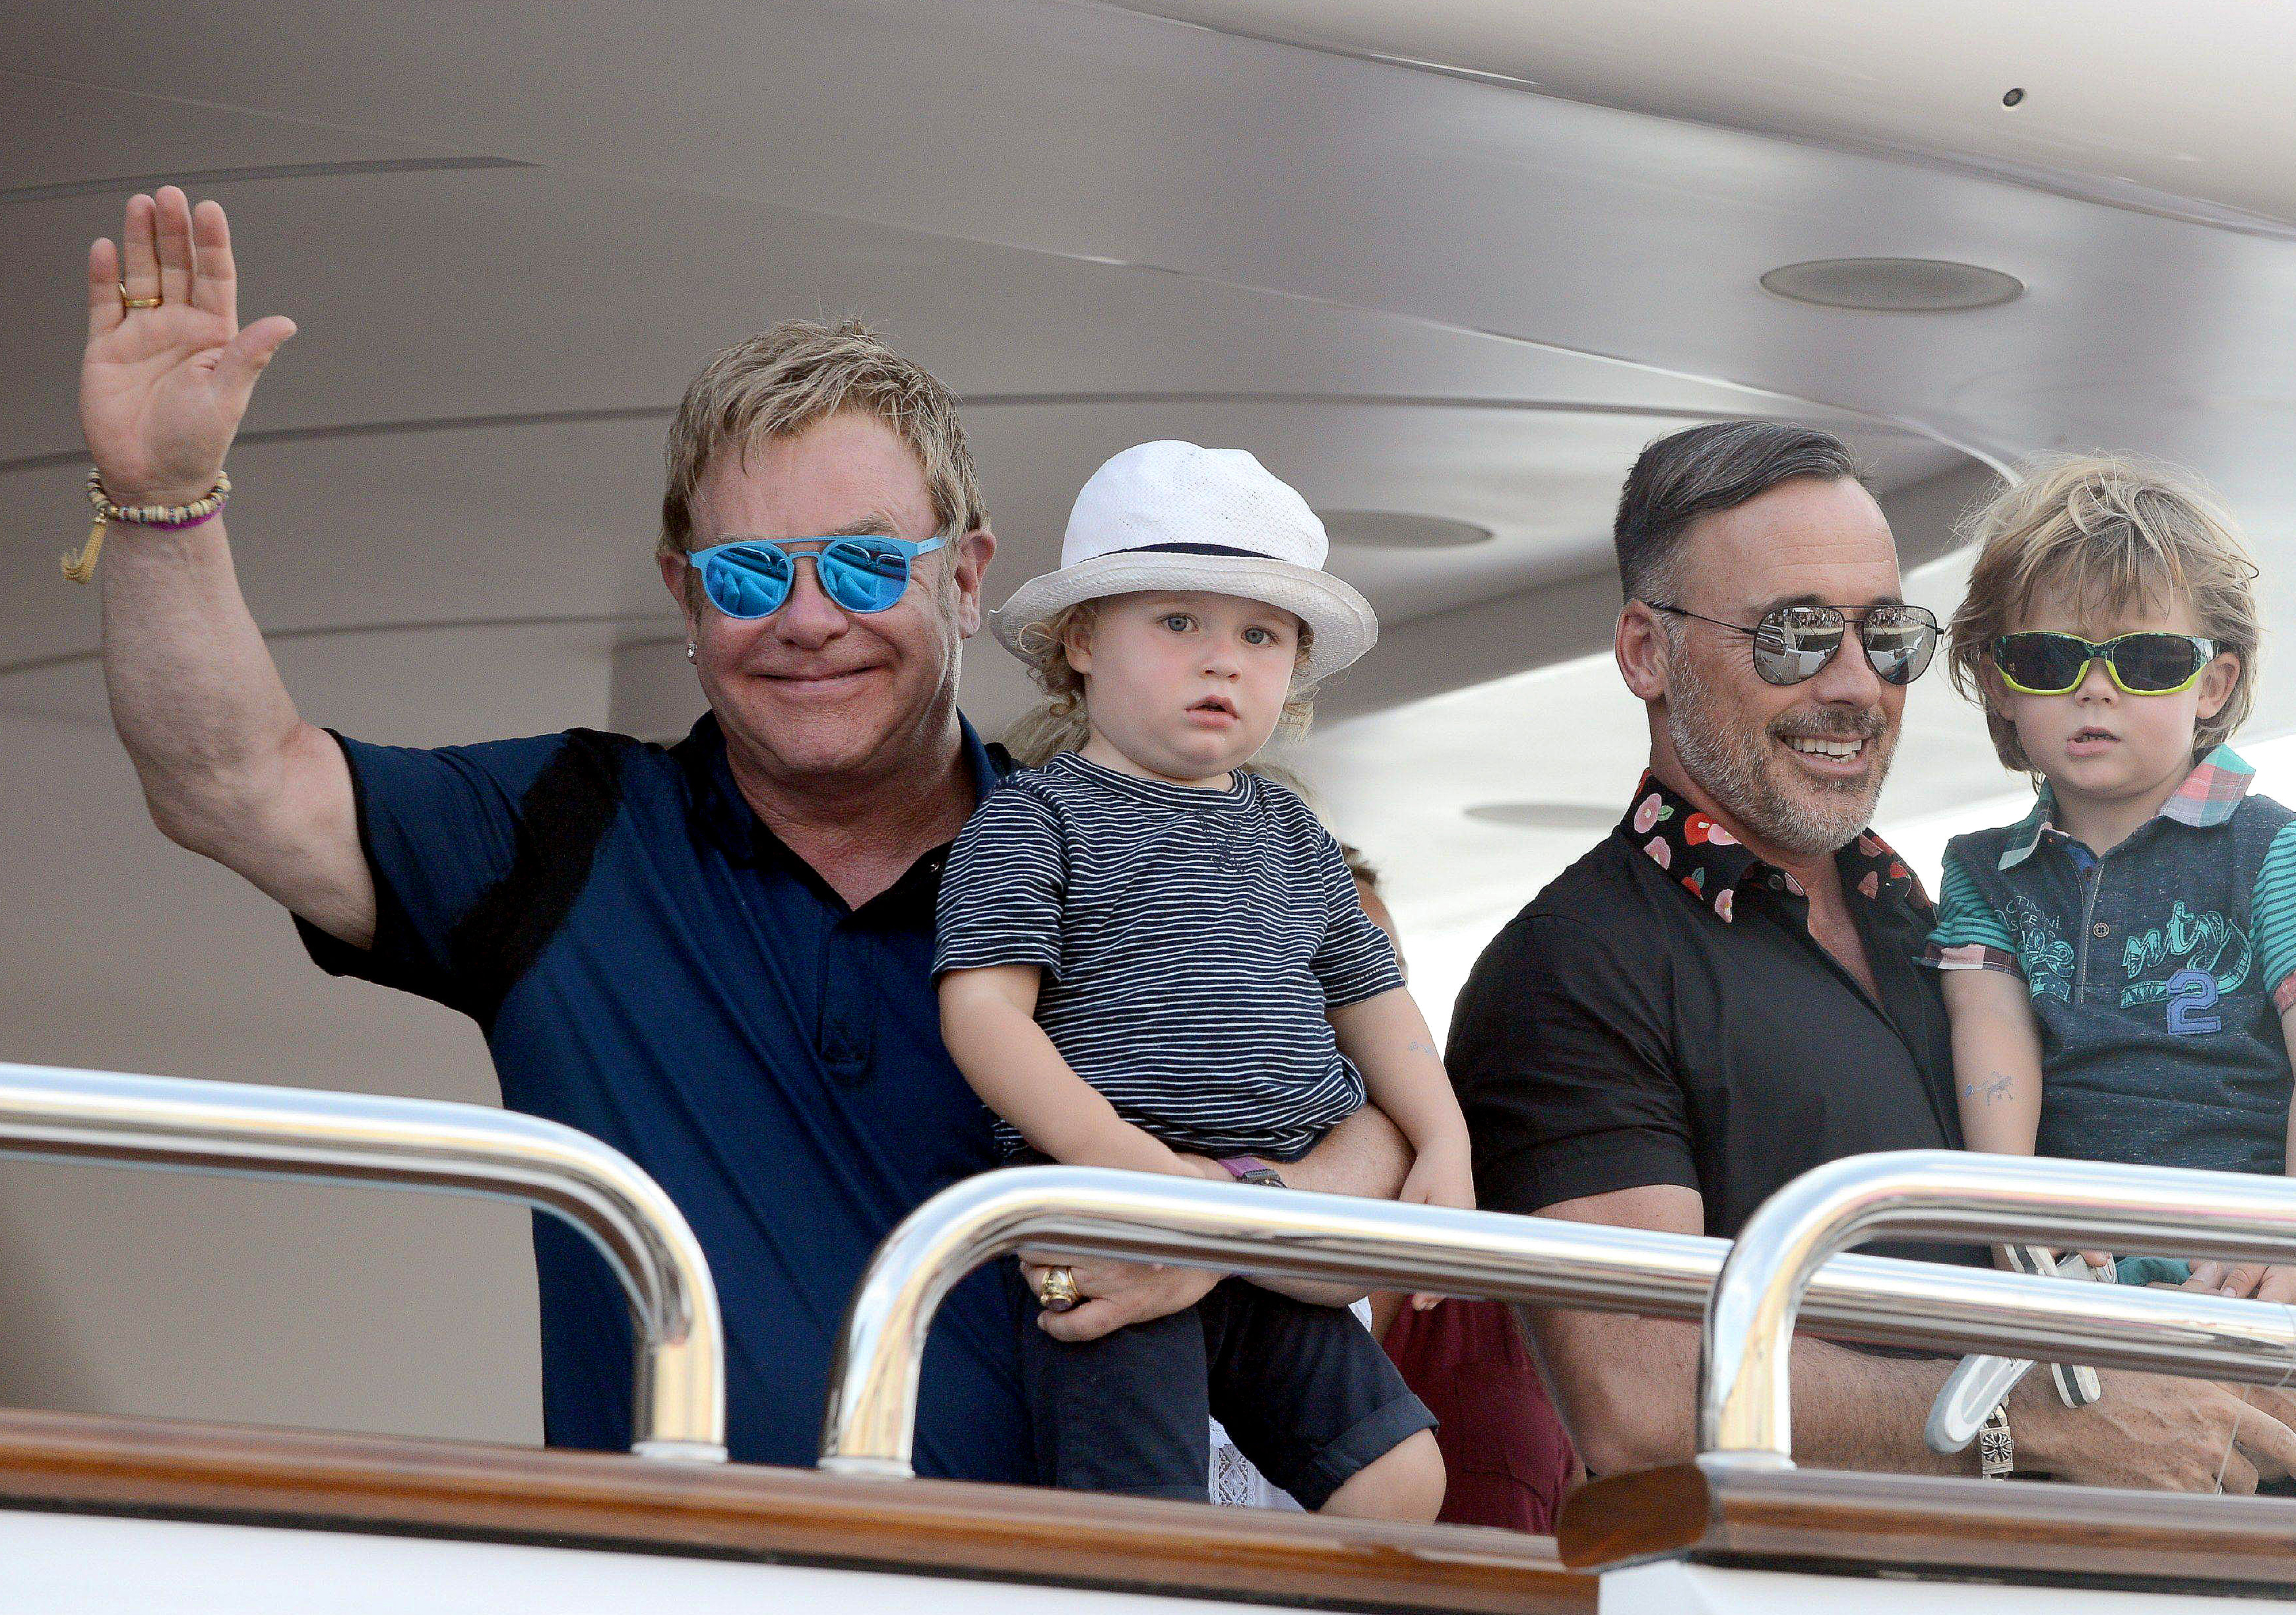 Elton John and David Furnish with their two Childr